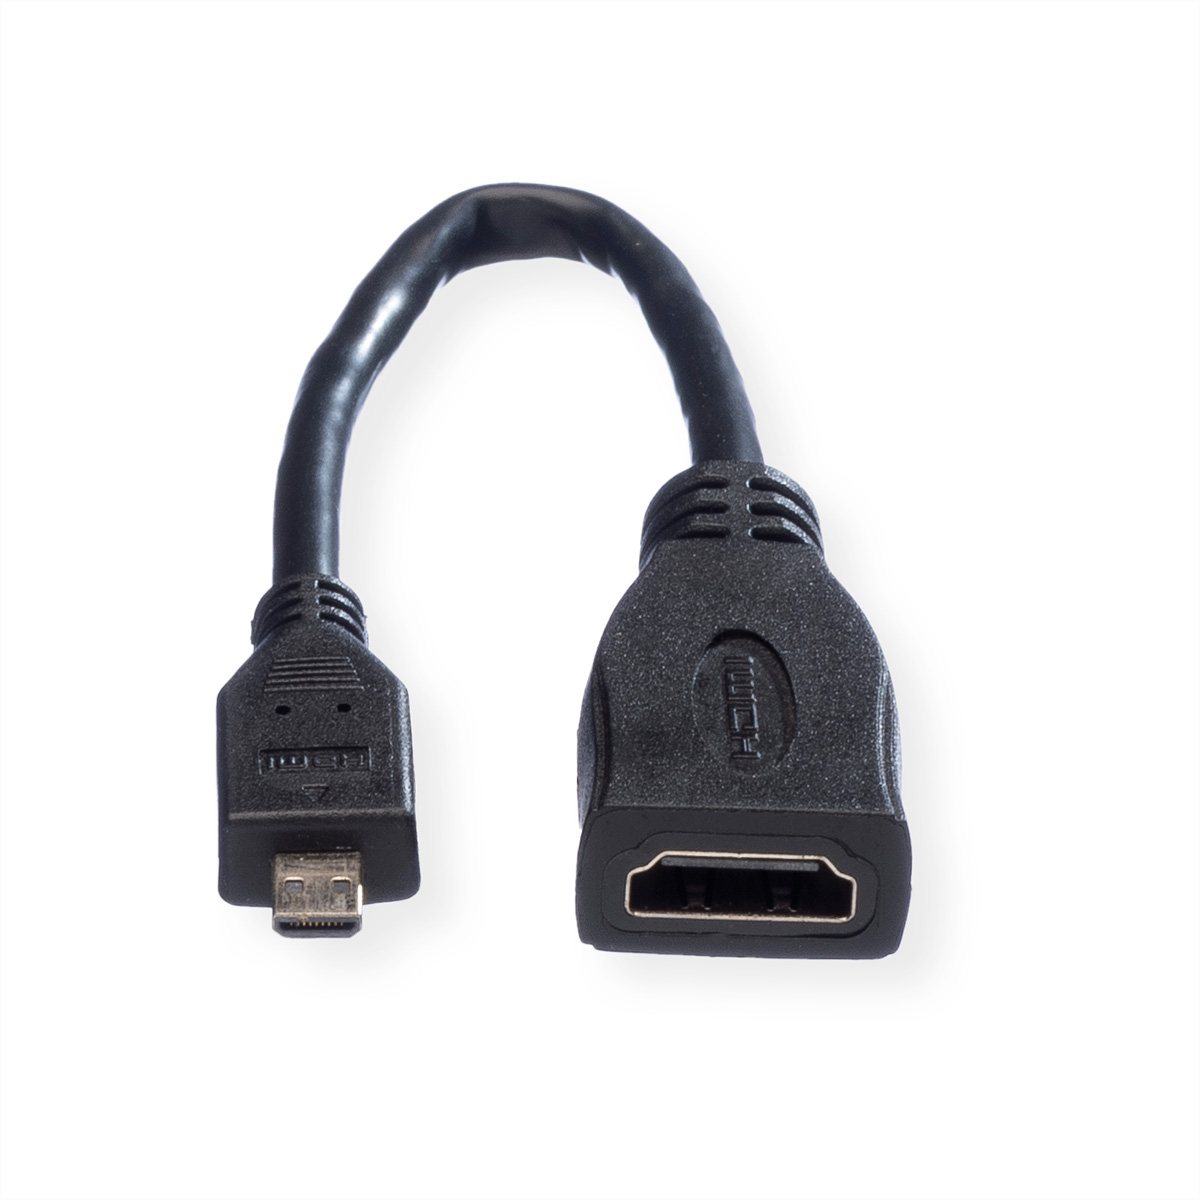 VALUE HDMI High HDMI High Speed Ethernet, ST HDMI Micro mit Kabel Speed BU with - Kabel HDMI Ethernet Micro